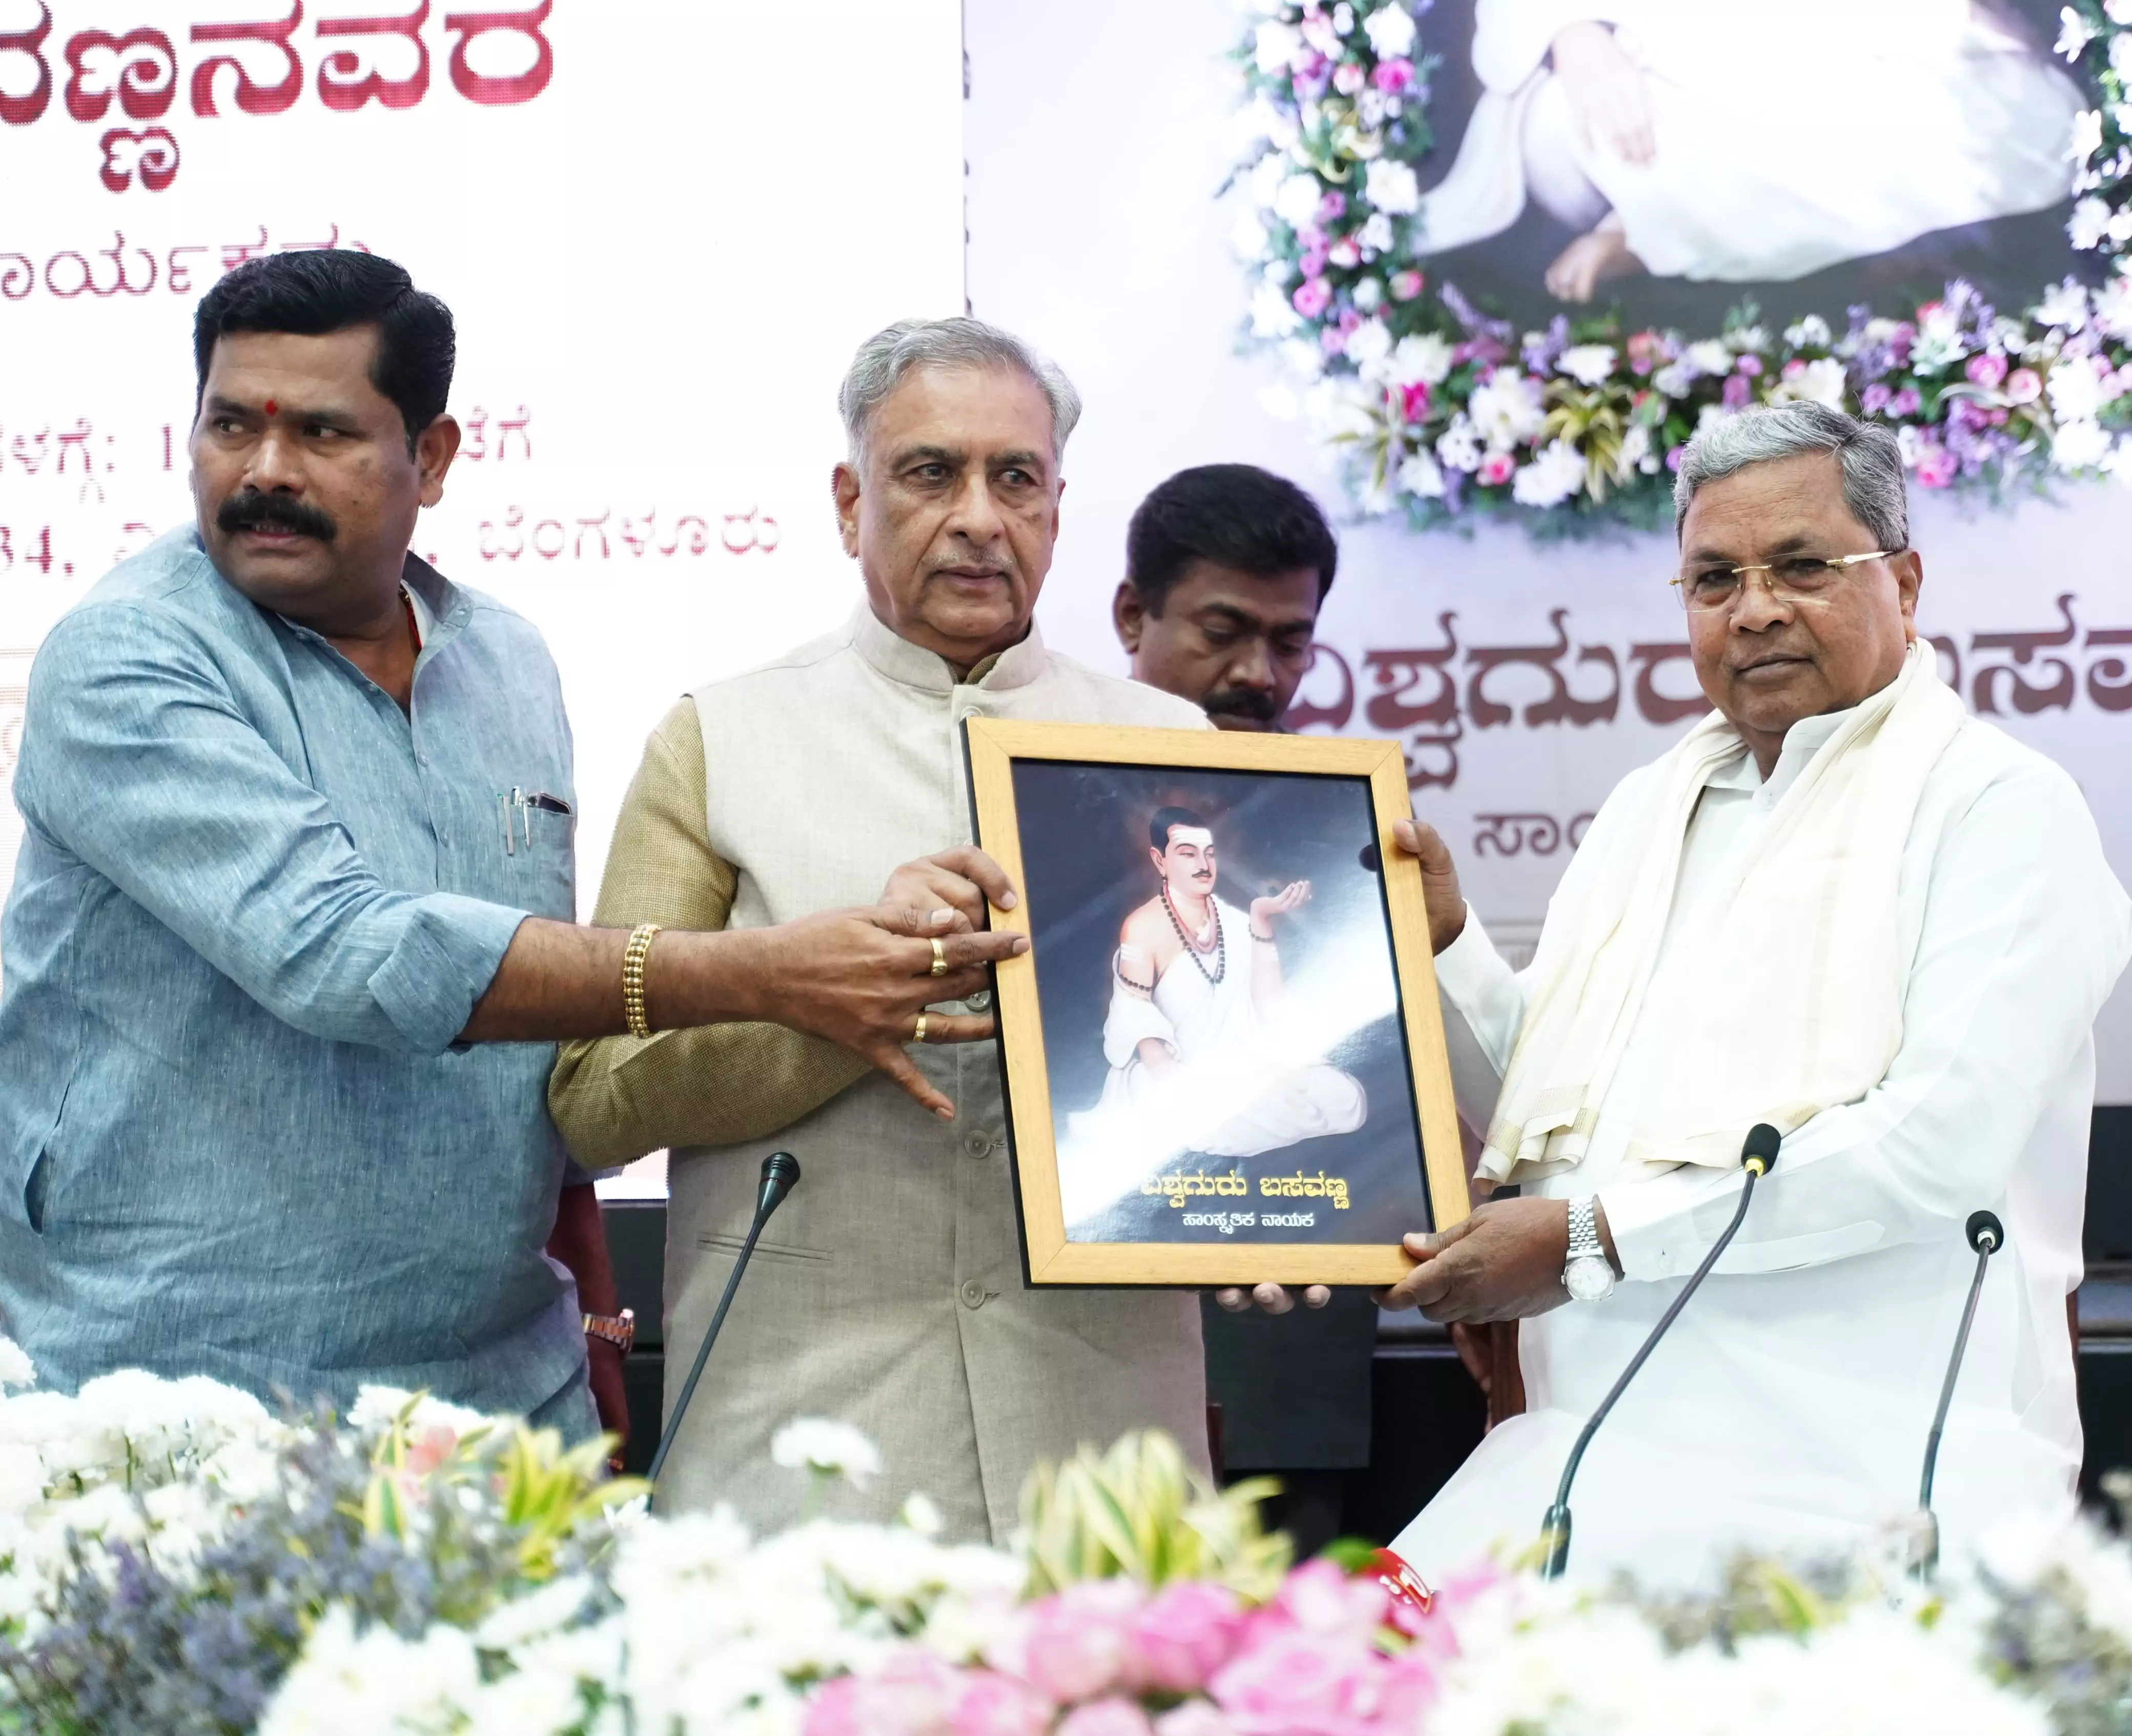 CM Siddaramaiah Initiates Statewide Basavanna Portrait Affixing at Govt Offices